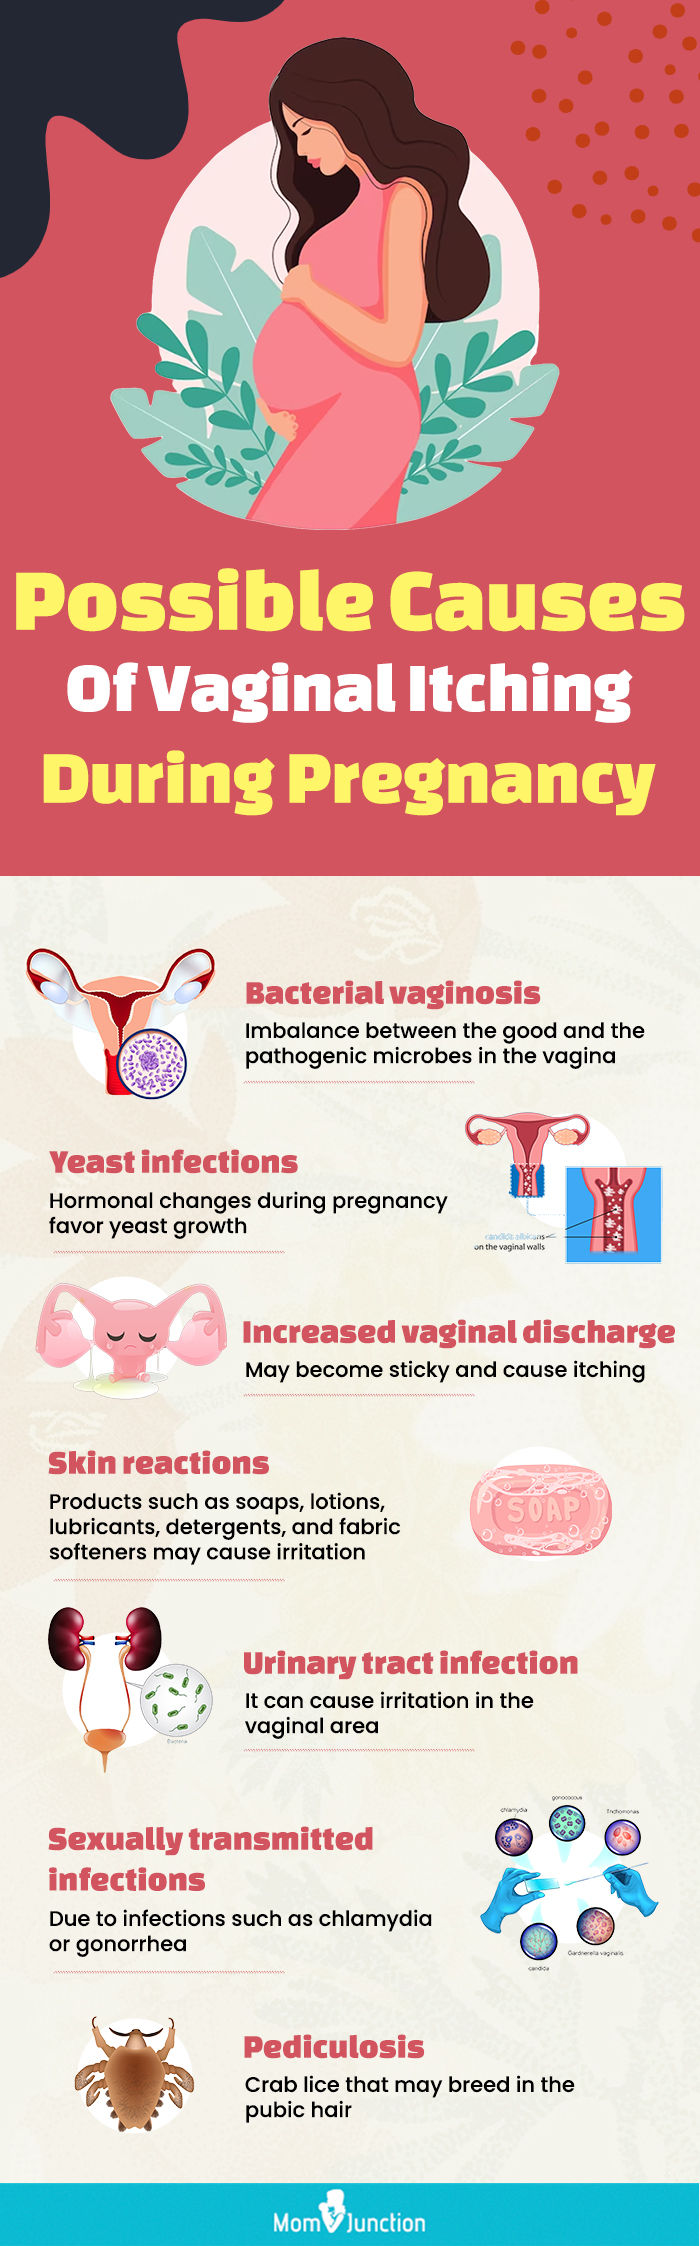 Vaginal Itching During Pregnancy Signs Causes Treatment